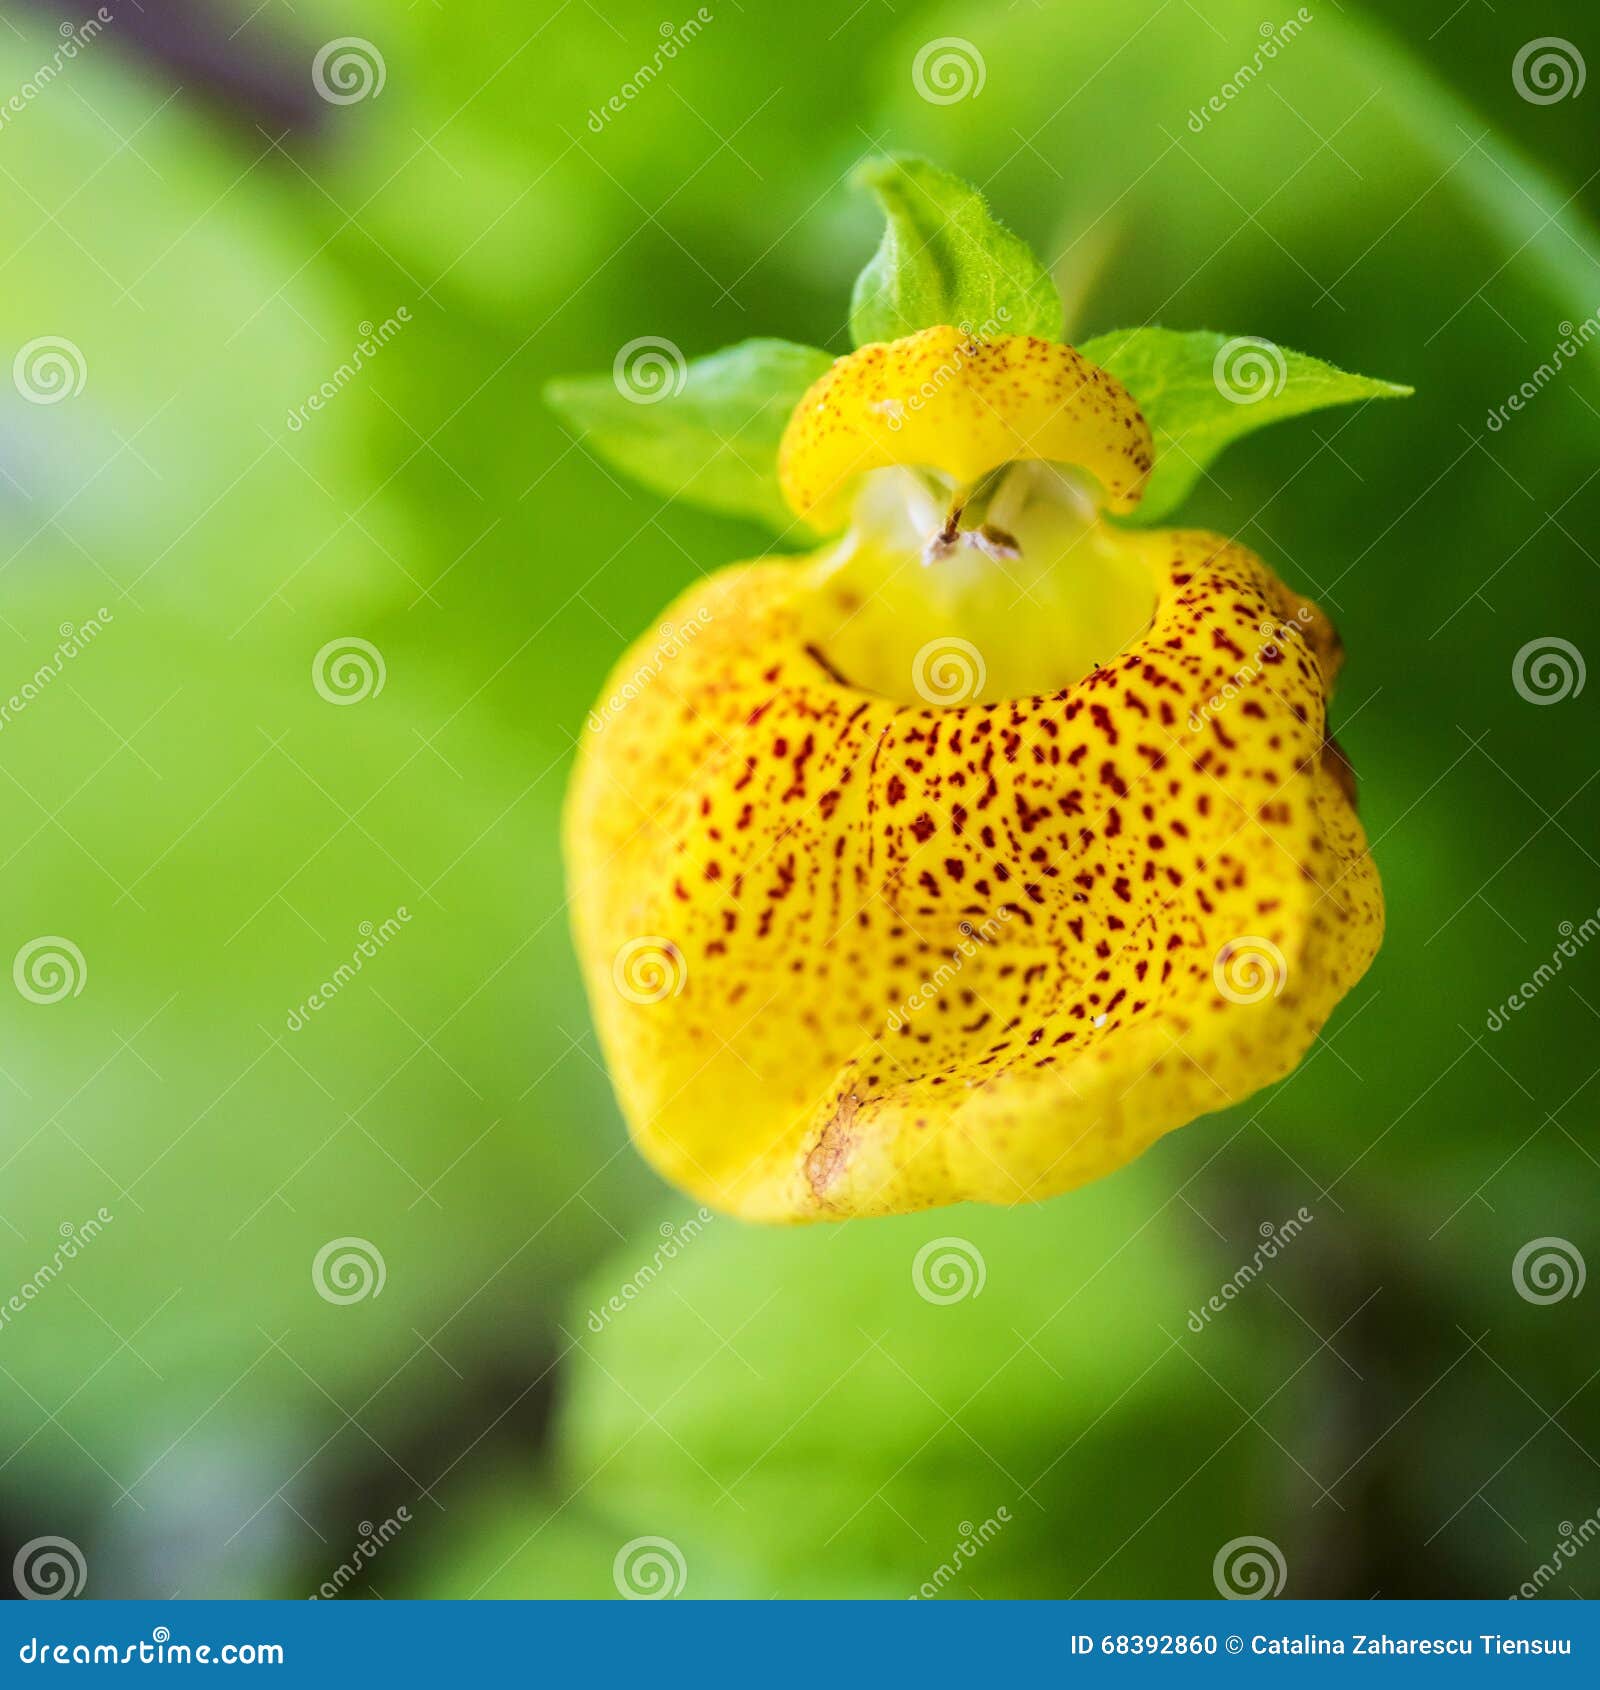 Ladies Purse (Calceolaria herbeo-hybrida), Stock Photo, Picture And Rights  Managed Image. Pic. Z39-138842 | agefotostock